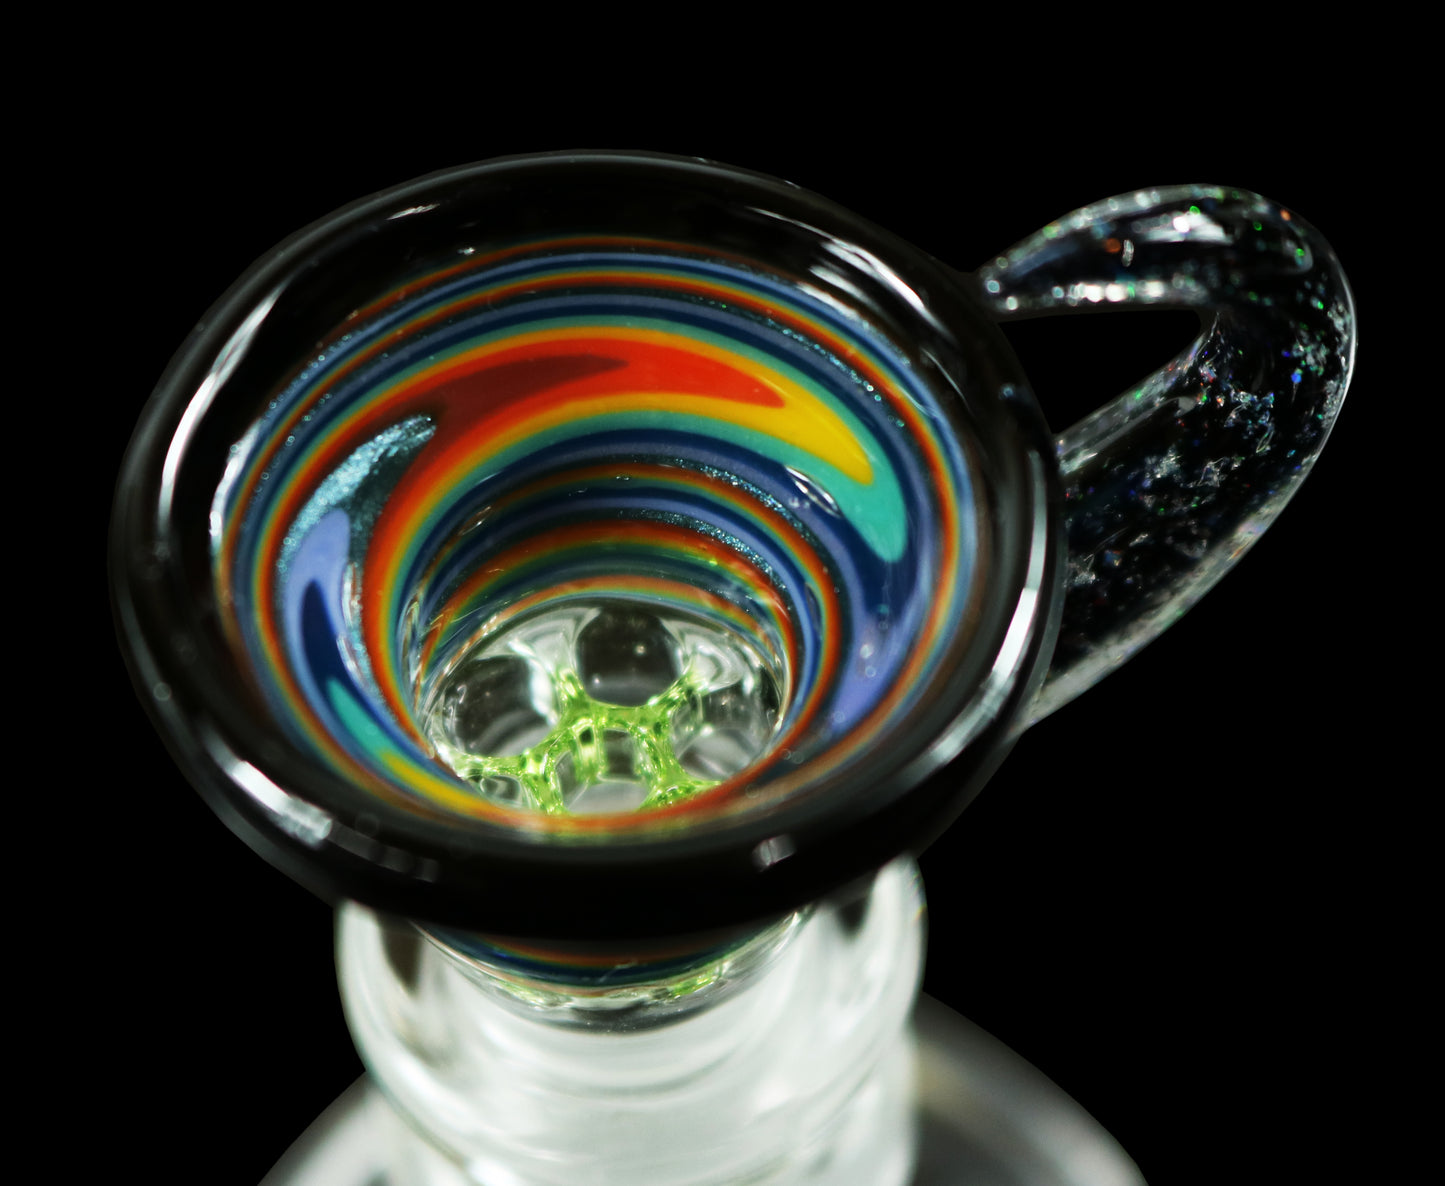 14mm Martini Slide with built in screen from Glass by Slick- Black/Rainbow/Glow in the Dark/Glitter